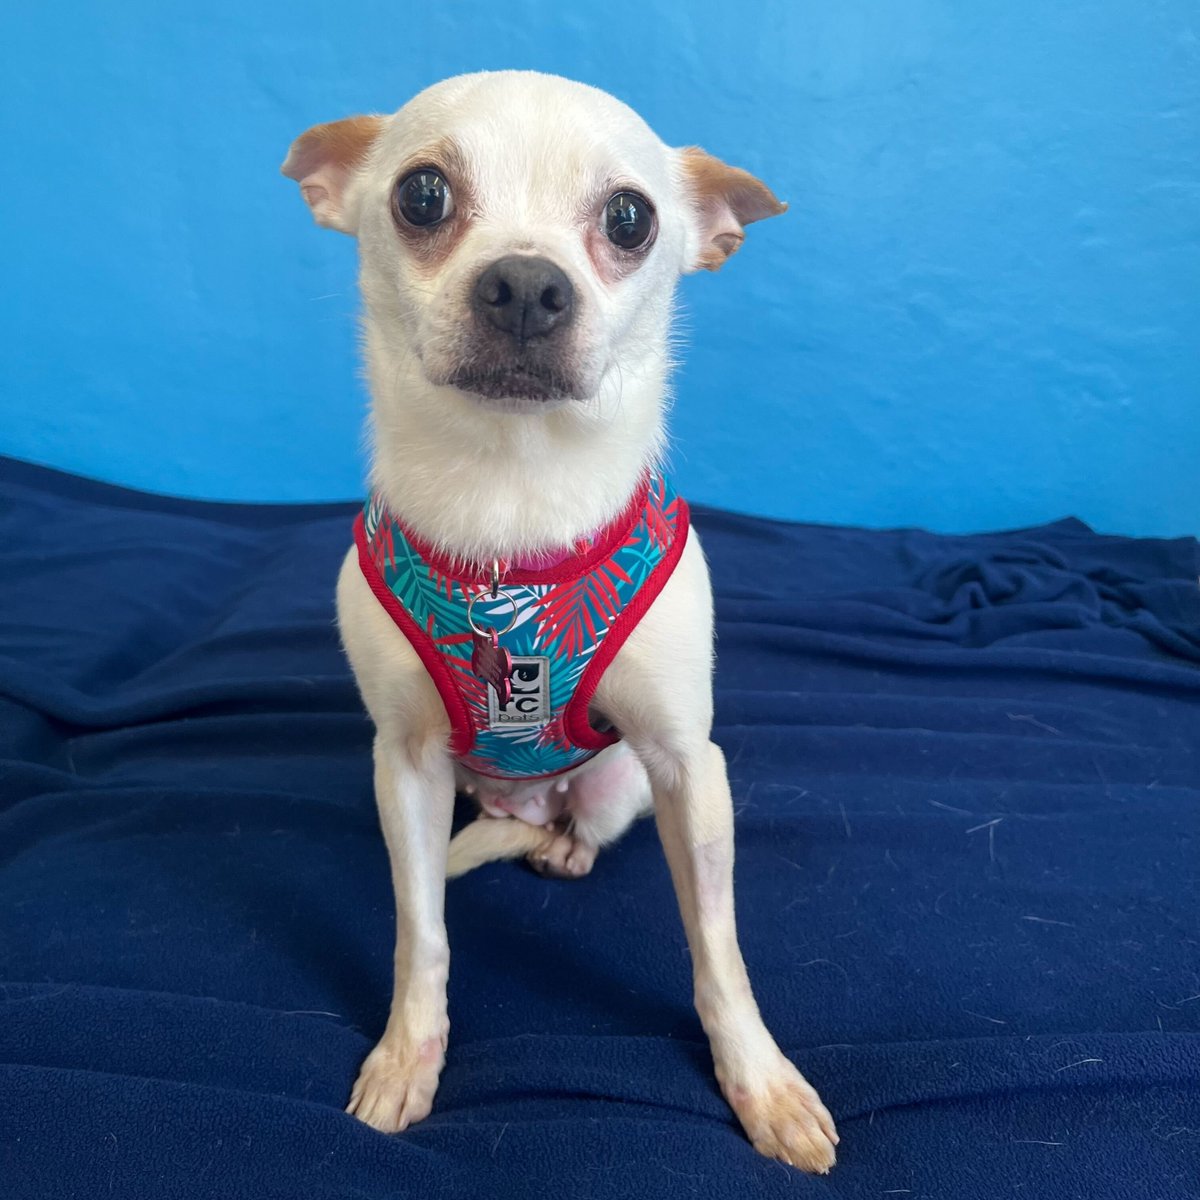 Newly rescued and available soon! buff.ly/3pNyI61 It's Heaps, Pupusa, Ghost & Miami. 
#Adopt a #seniordog #dogsoftwitter #pets #dogs #petadoption #rescue #rescuedogs #seniorodgsrock #love #hope